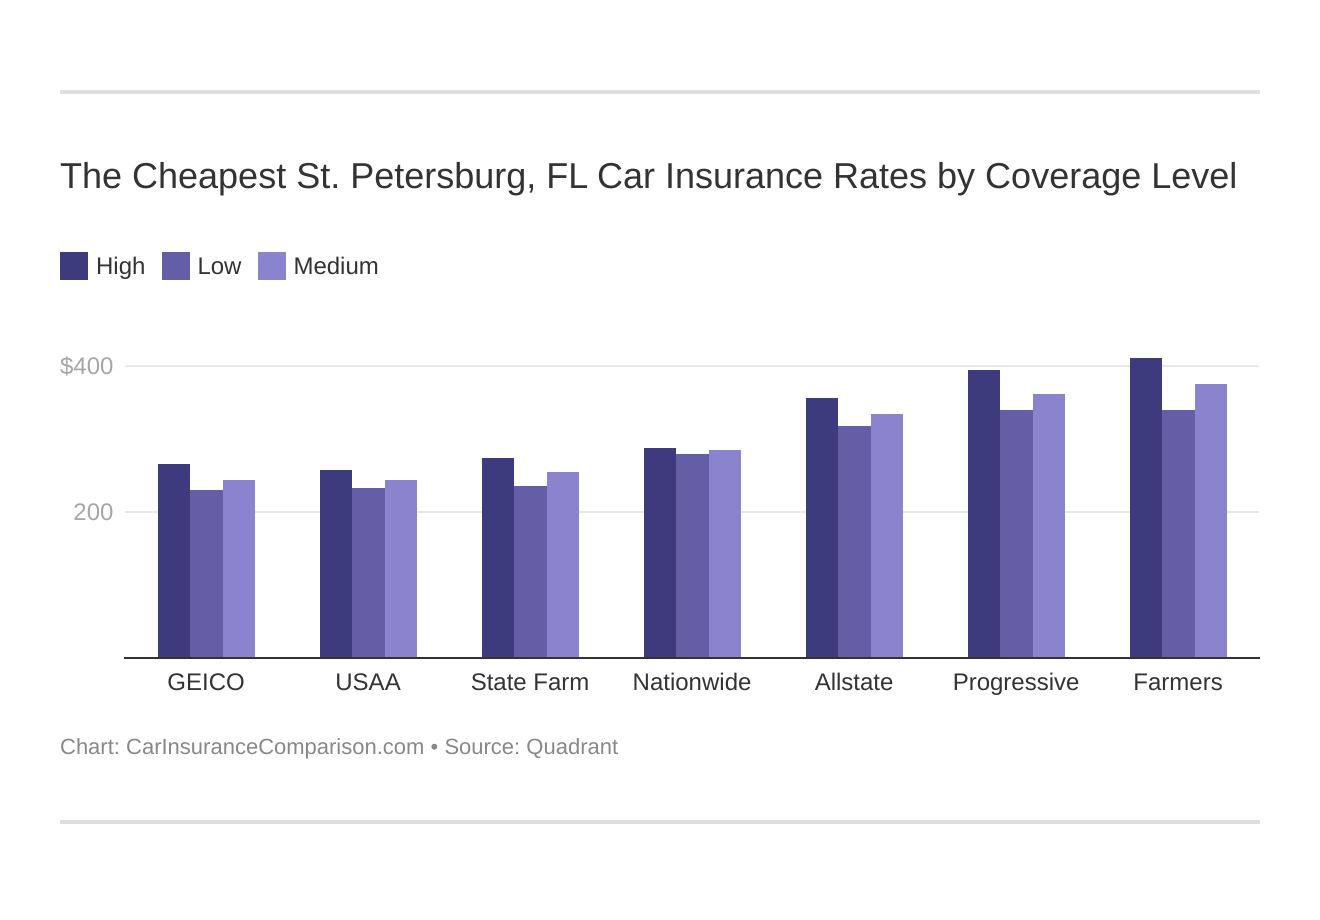 The Cheapest St. Petersburg, FL Car Insurance Rates by Coverage Level